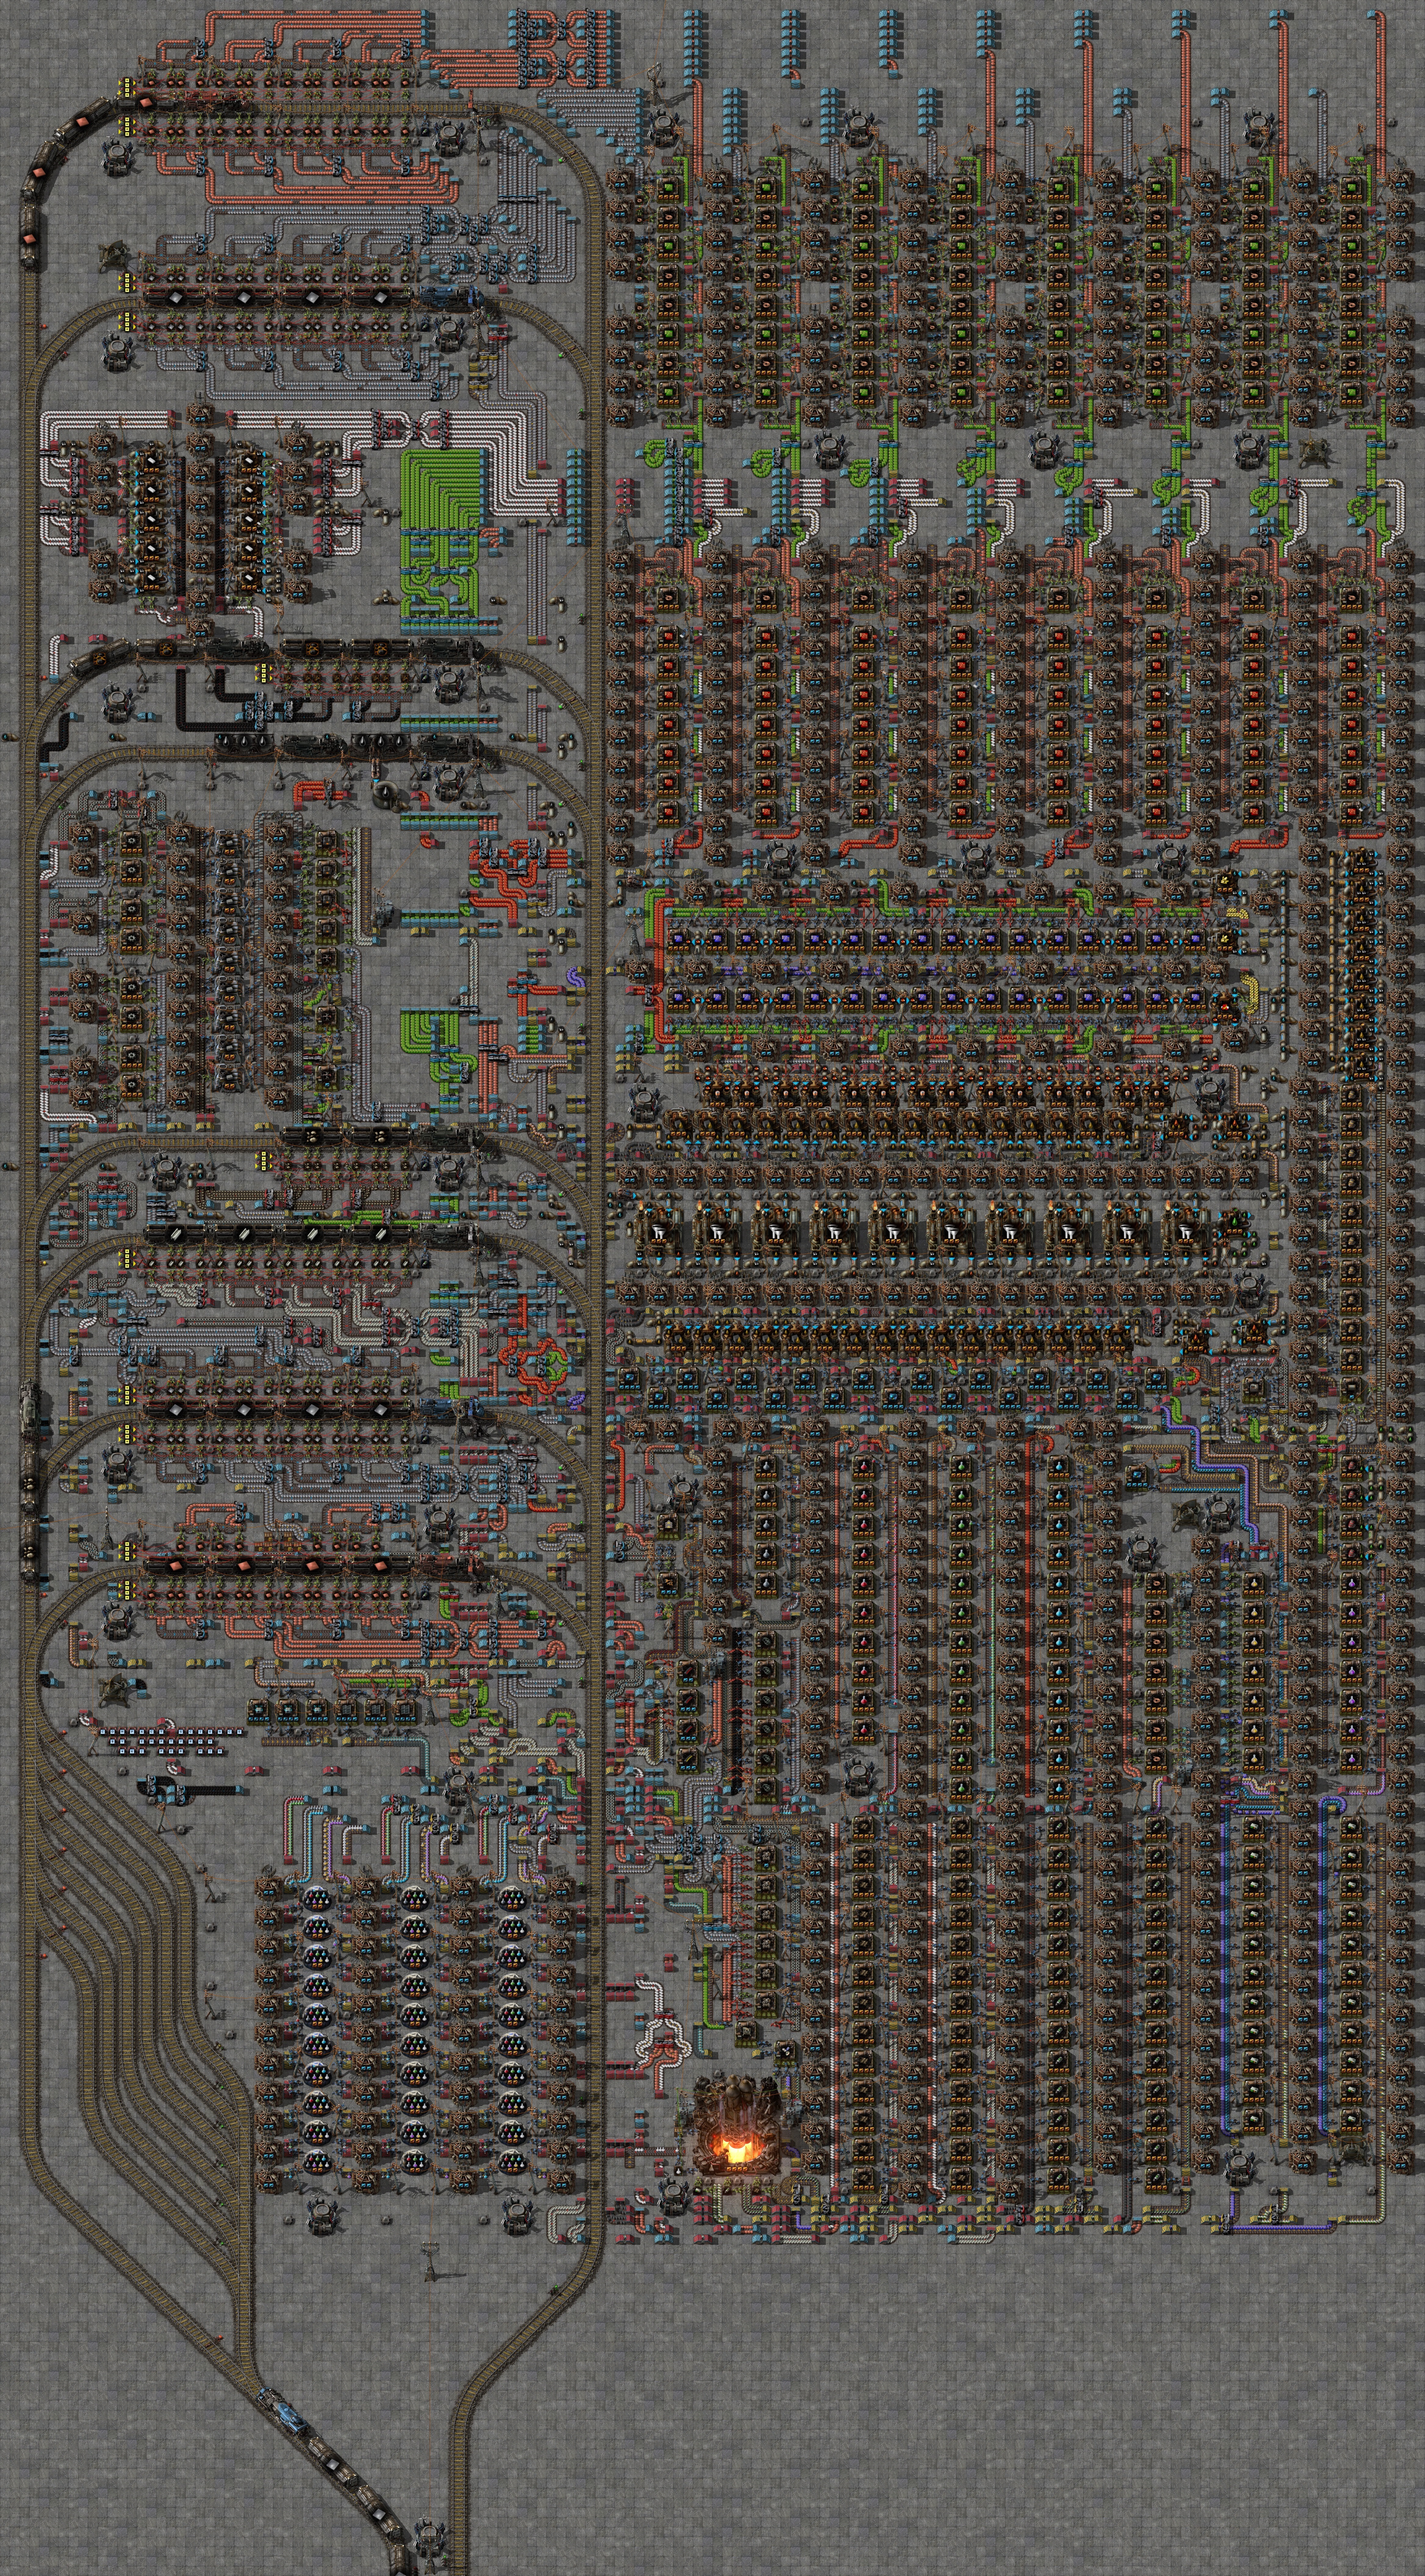 High Res with overlay [Compact Science v1.0 by EmptyRov].jpg